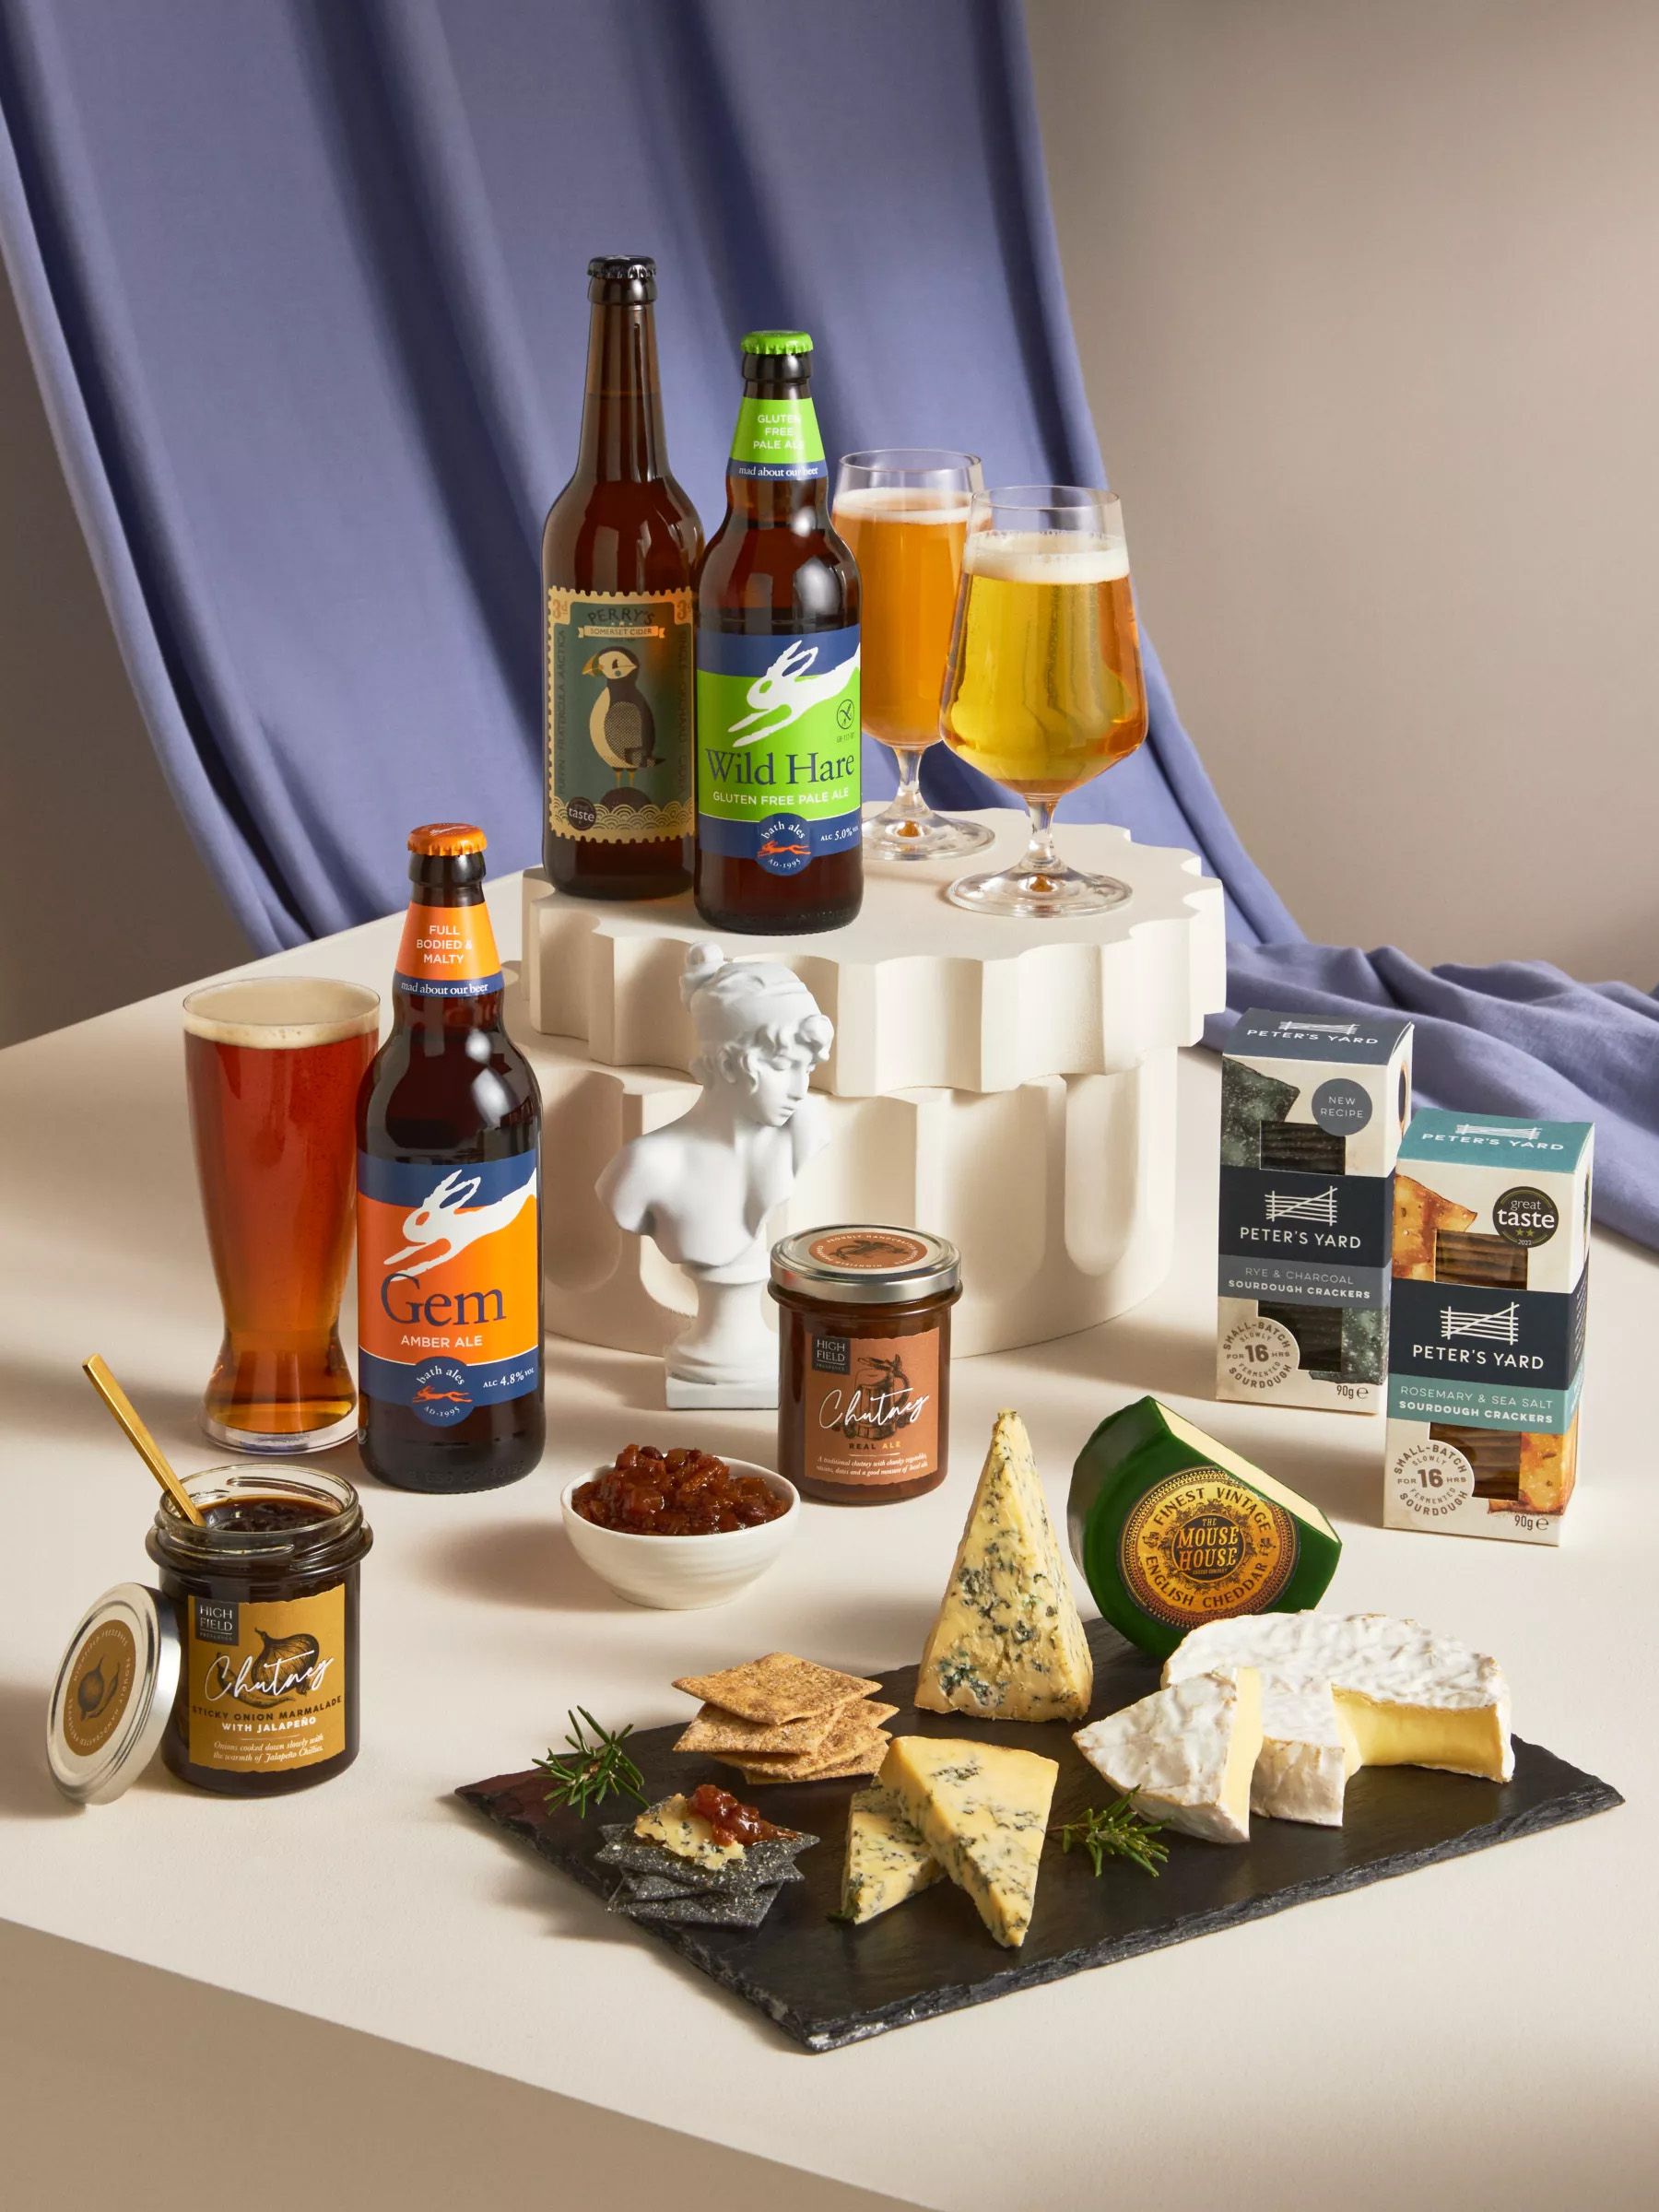 John Lewis Ultimate Cheese Box with Beers and cheese